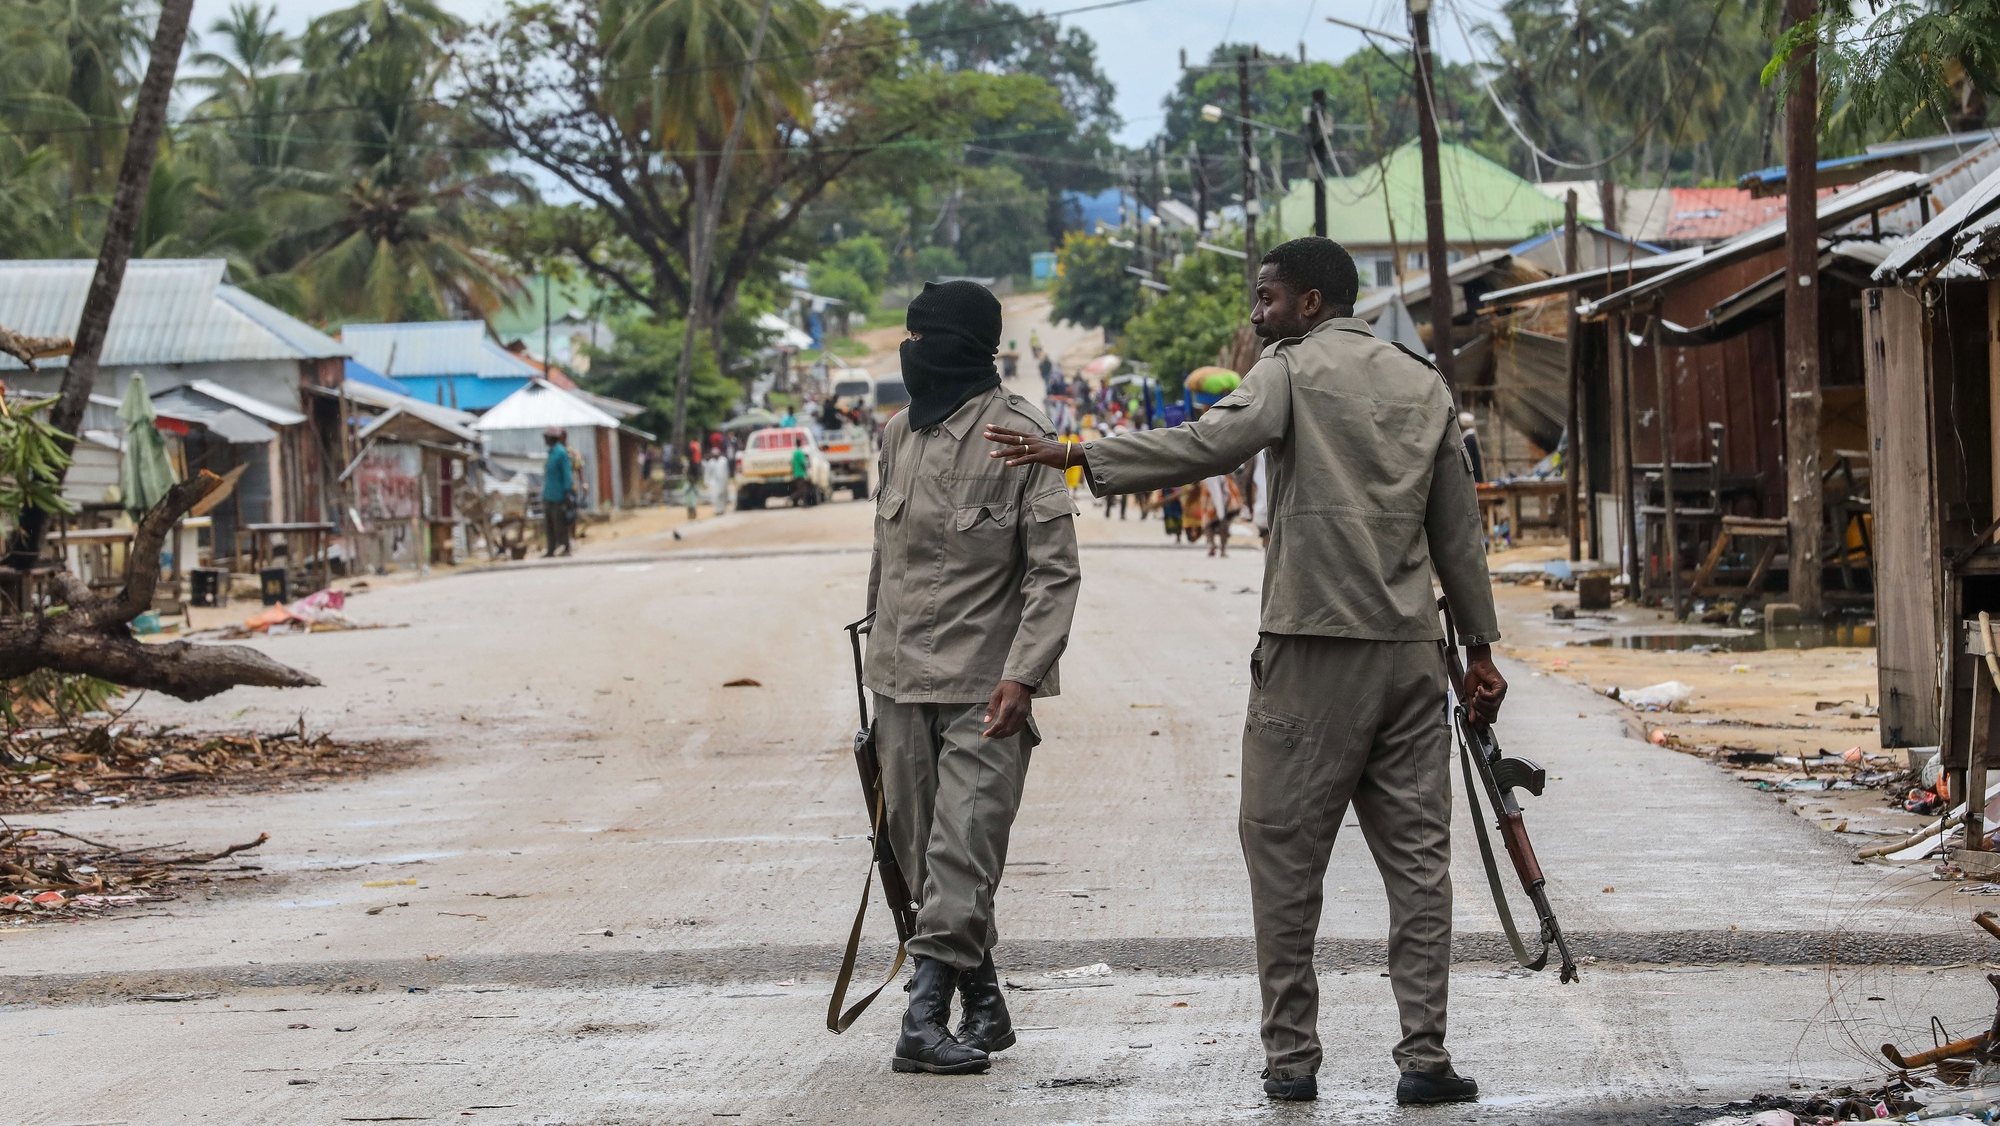 Mozambique army soldier patrols the streets of Palma., Cabo Delgado, Mozambique, 12 April 2021. The violence unleashed more than three years ago in Cabo Delgado province escalated again about two weeks ago, when armed groups first attacked the town of Palma. JOAO RELVAS/LUSA